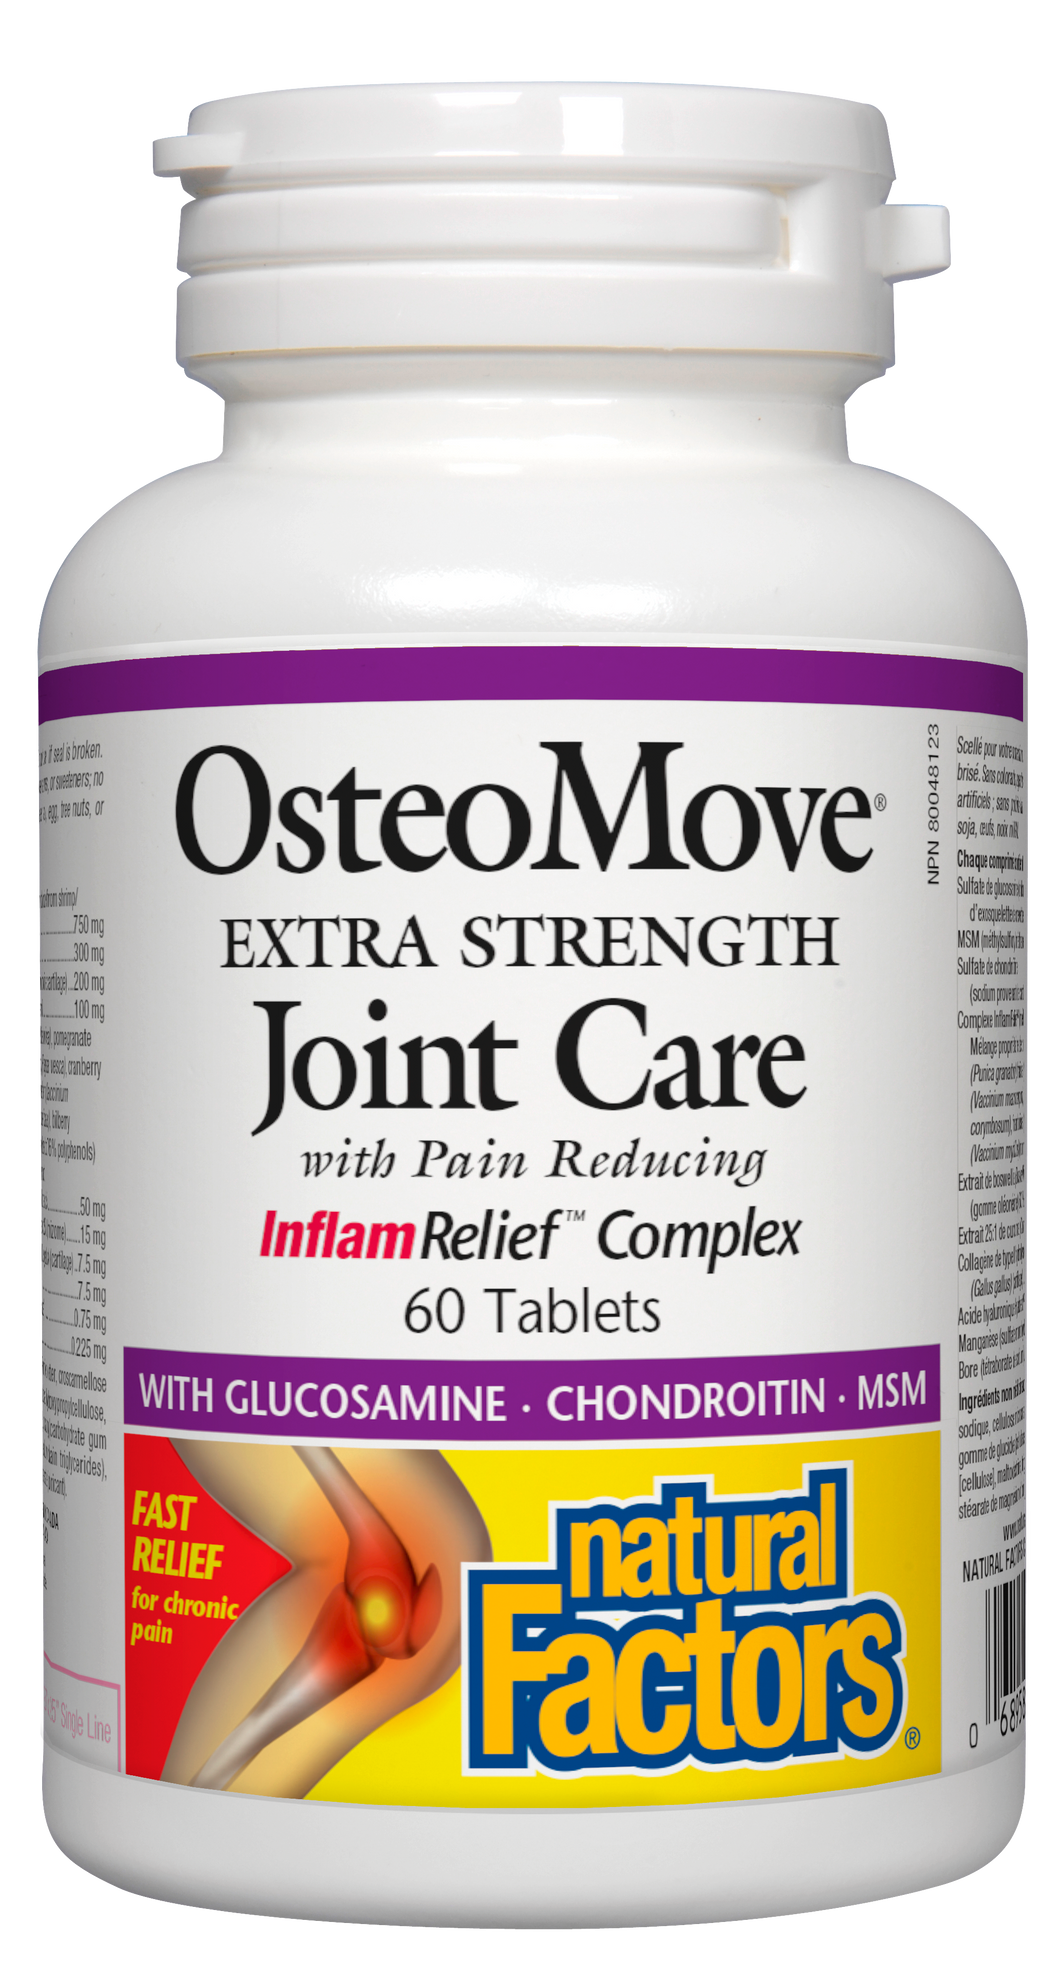 OsteoMove Extra Strength Joint Care from Natural Factors provides fast relief from acute and chronic pain and has extensive long-term benefits for joint health. A powerful anti-inflammatory, OsteoMove slows down cartilage degeneration, maintains strong and healthy bones, and encourages the repair of connective tissue.